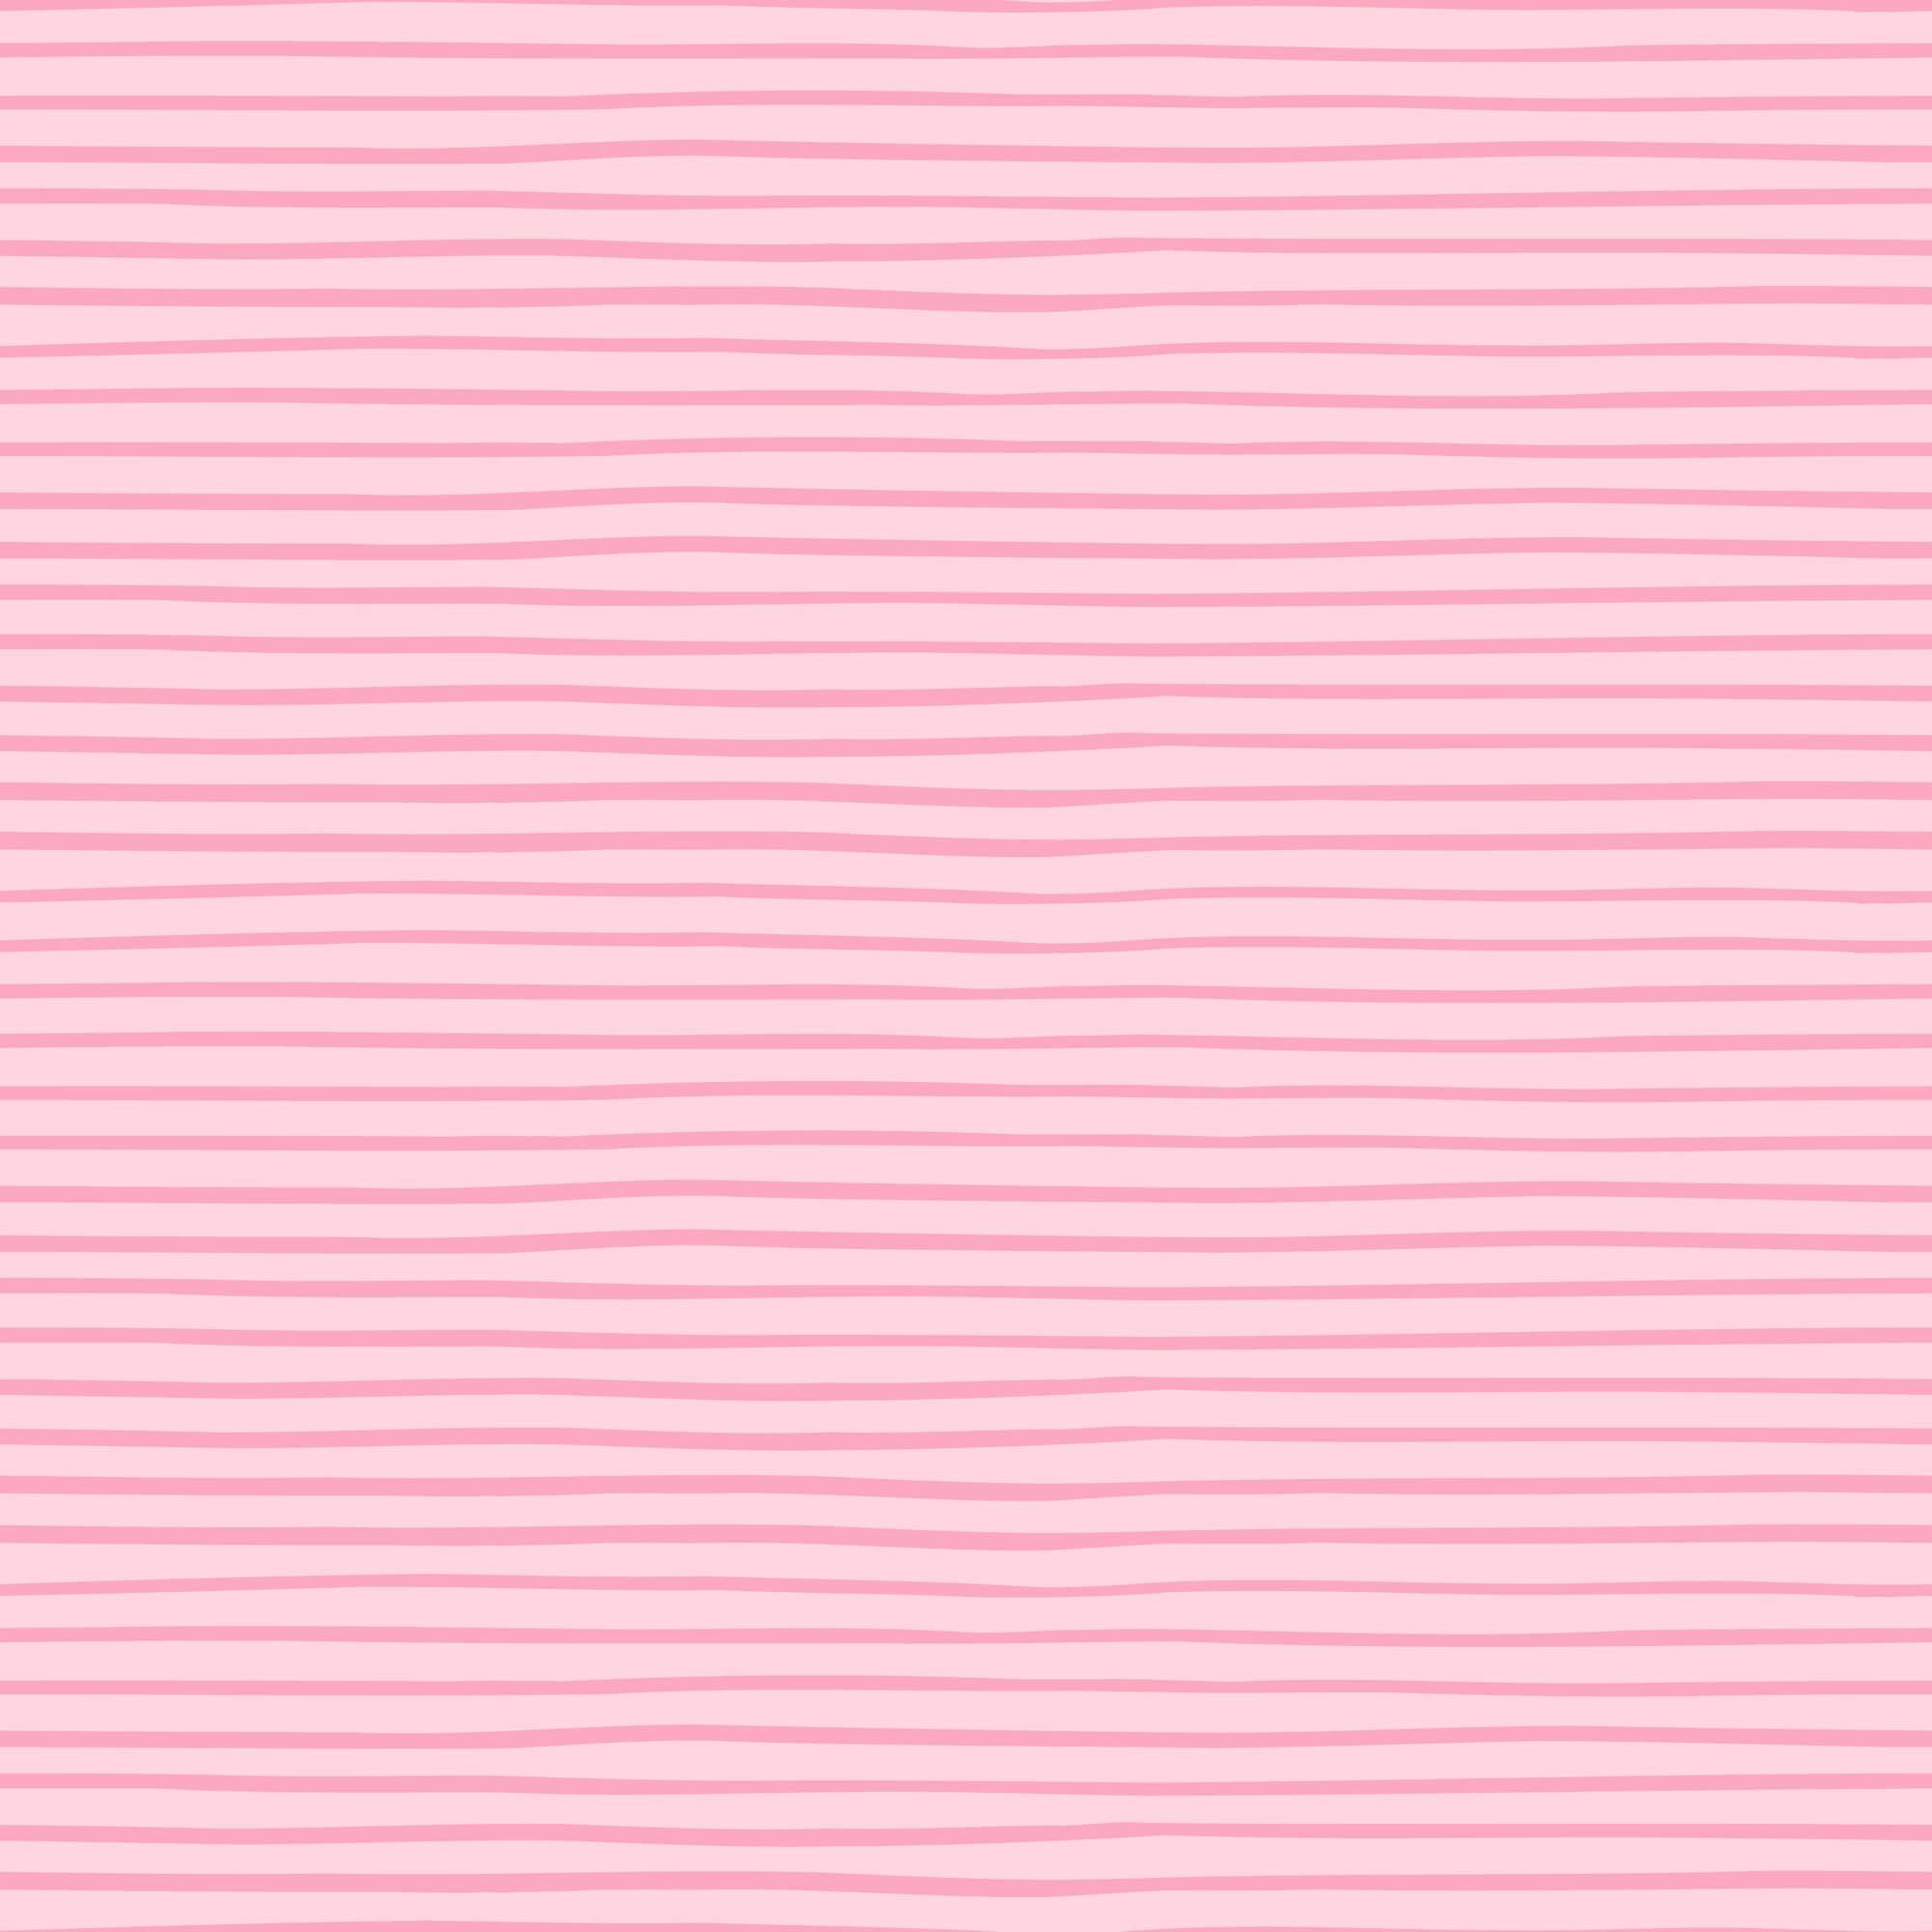 Sunkissed Collection Pink Stripes 12 x 12 Double-Sided Scrapbook Paper by SSC Designs - Scrapbook Supply Companies